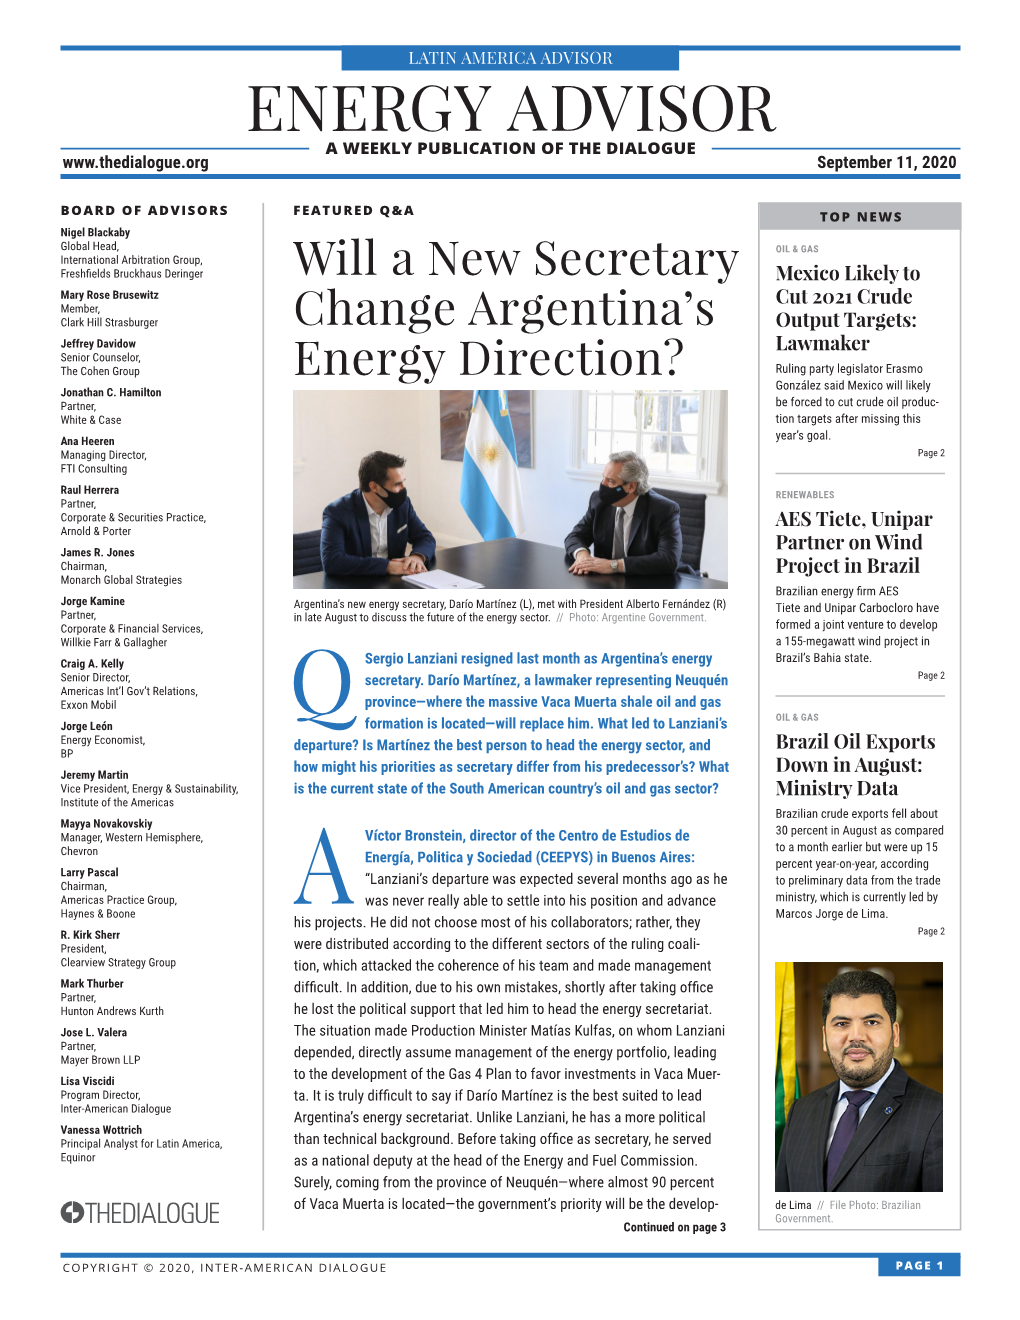 ENERGY ADVISOR a WEEKLY PUBLICATION of the DIALOGUE September 11, 2020